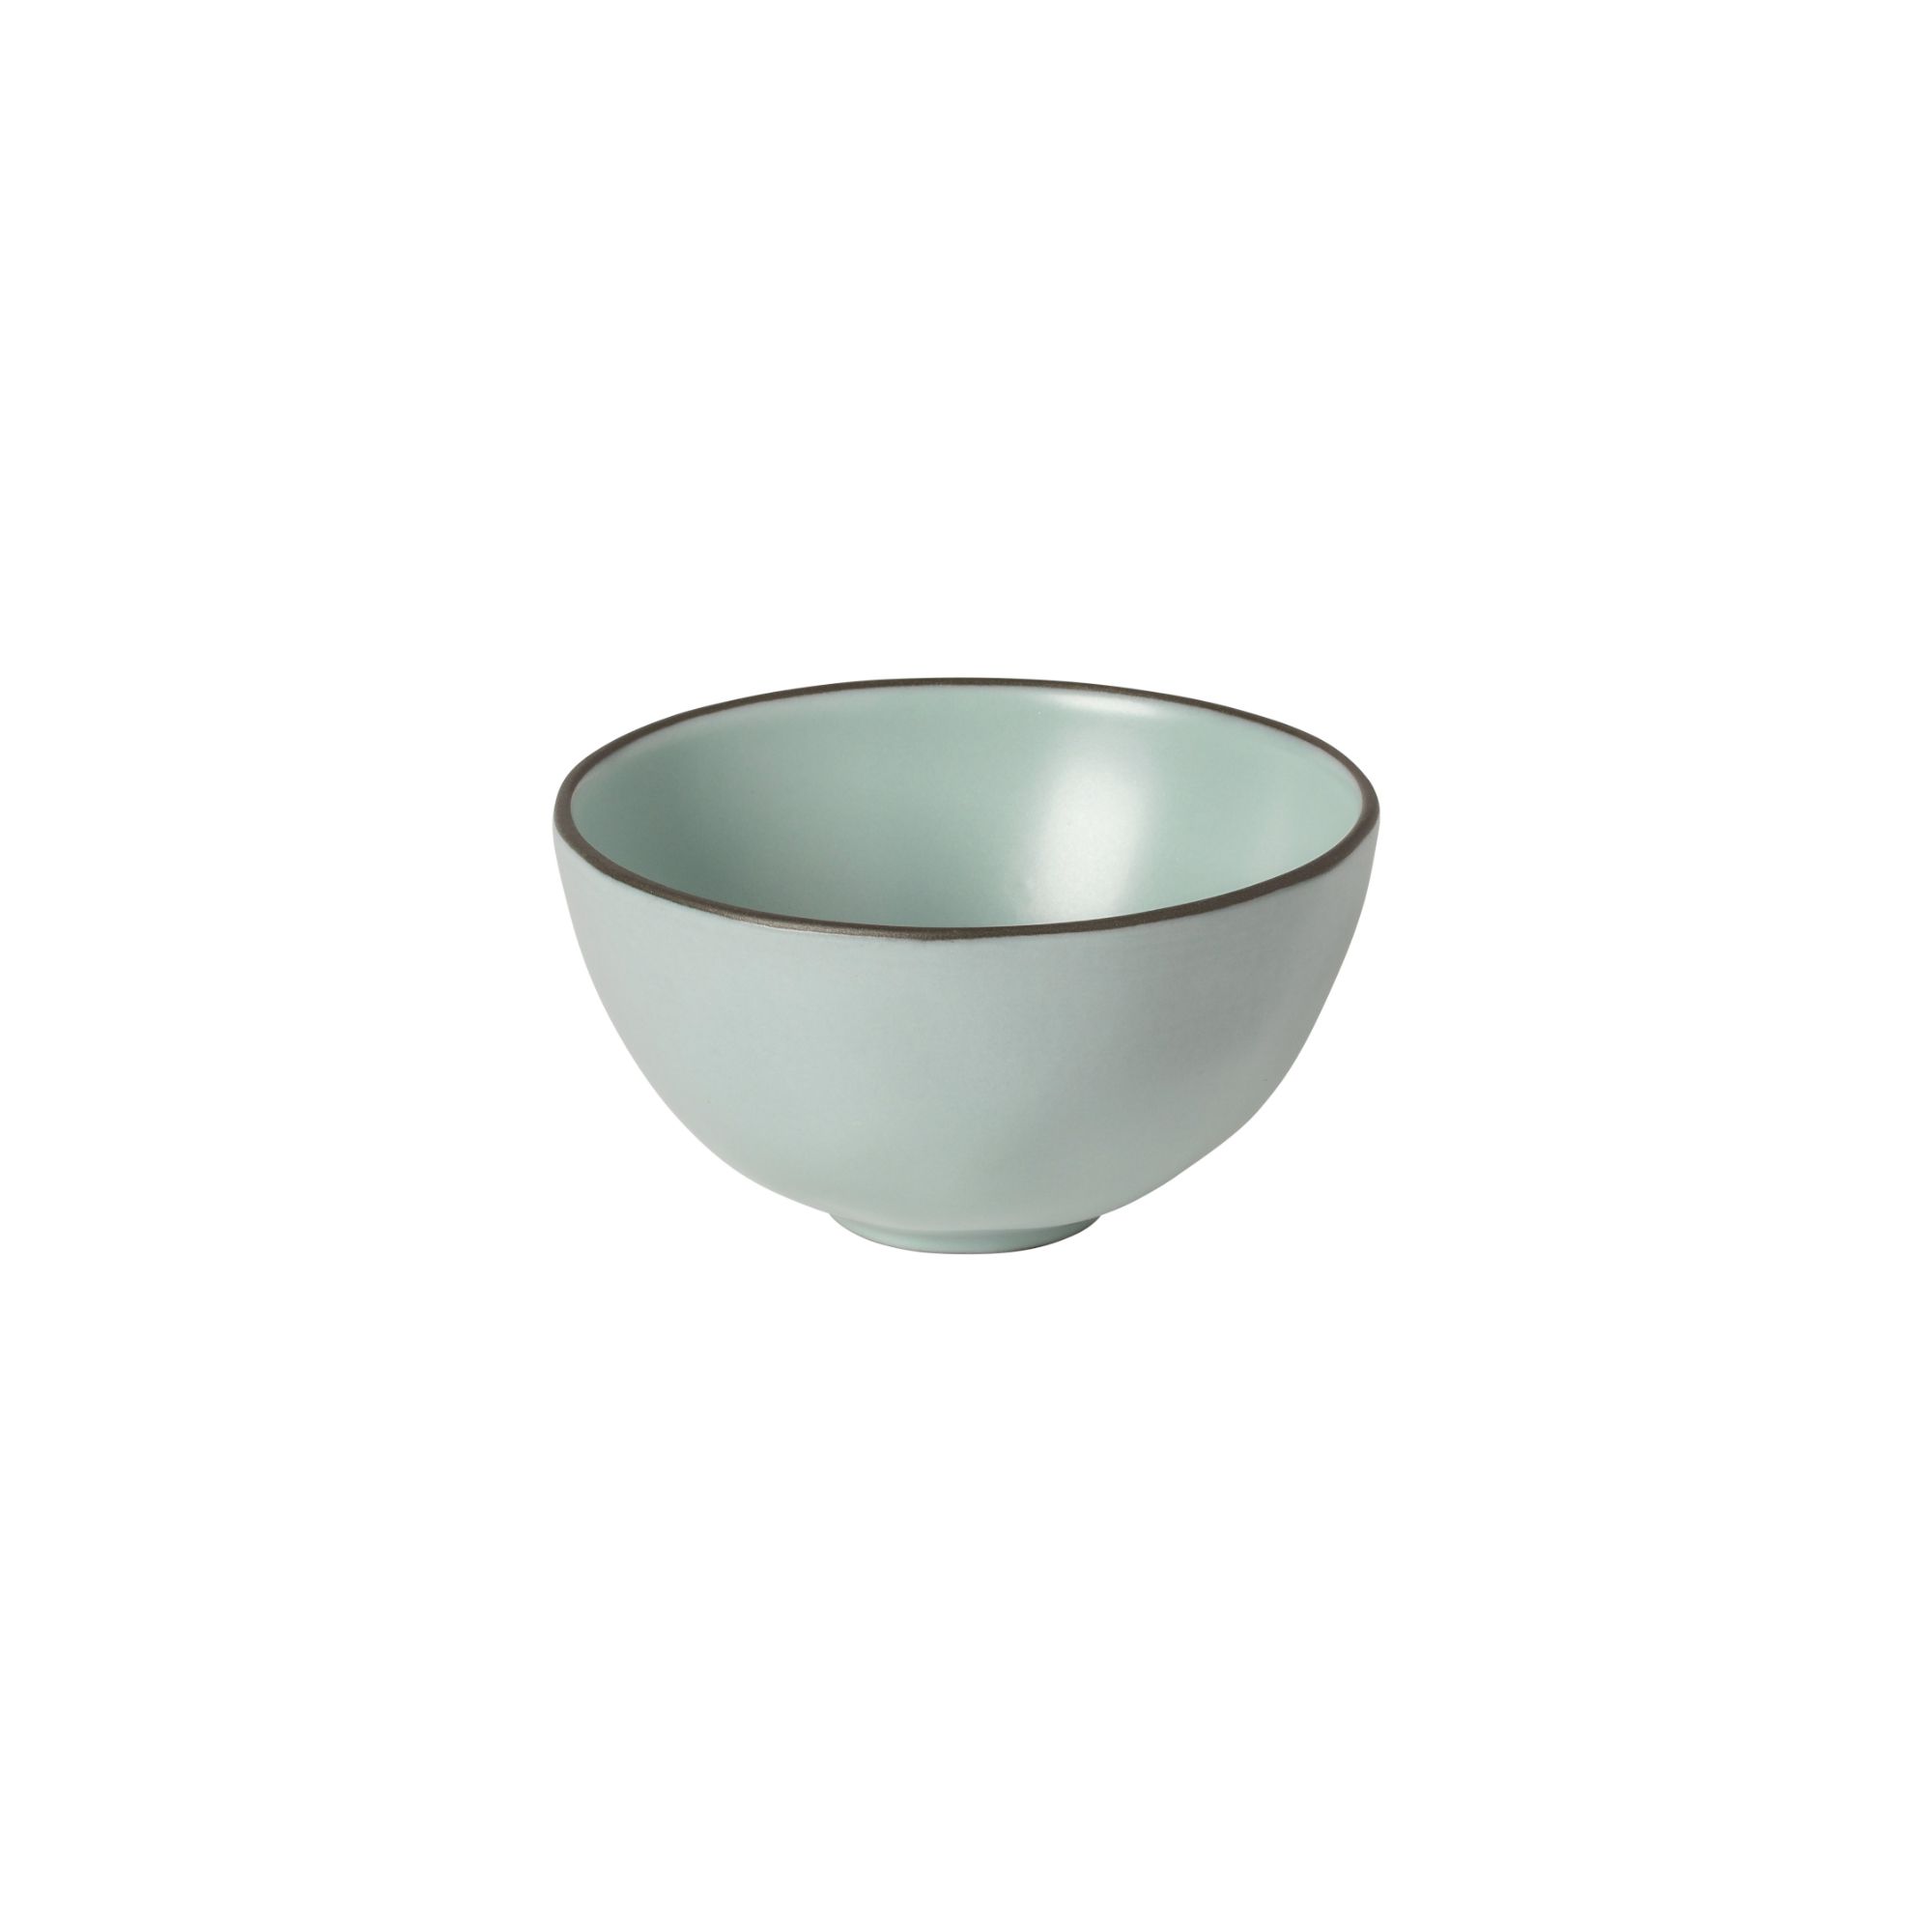 Stacked Organic Sky Soup/cereal Bowl 15cm Gift